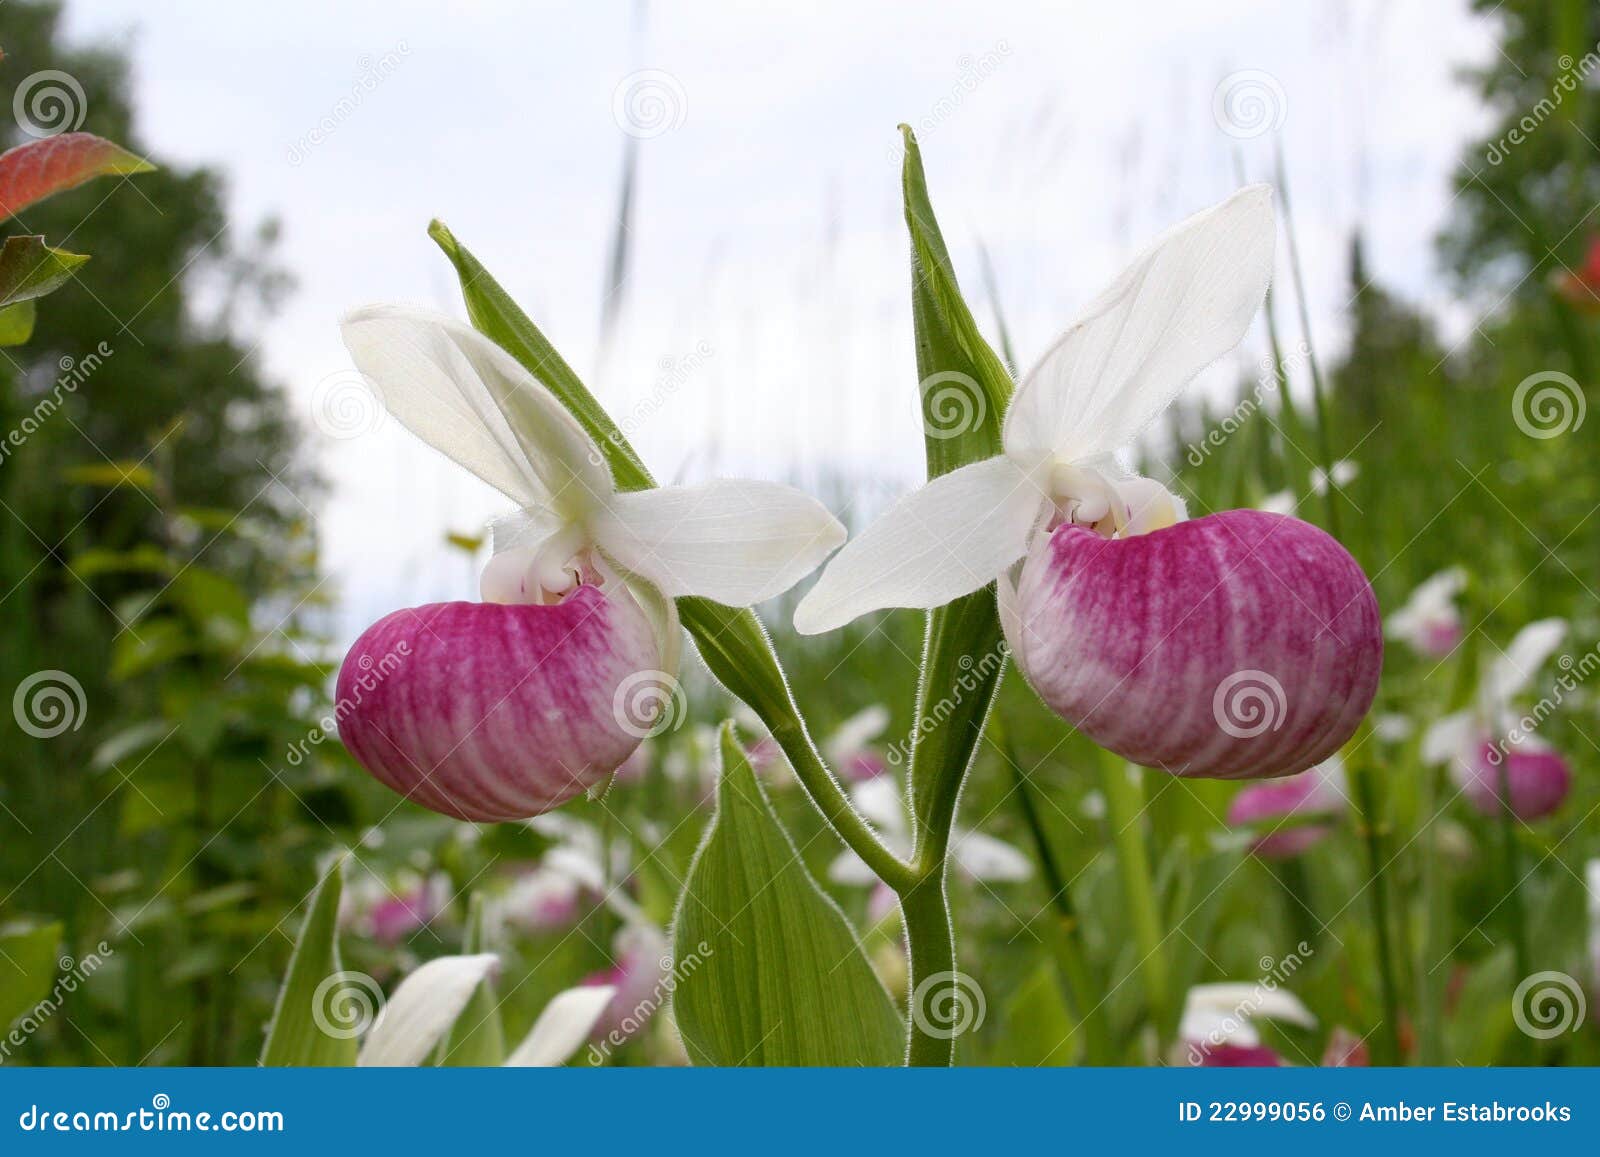 two showy lady's slipper blossoms